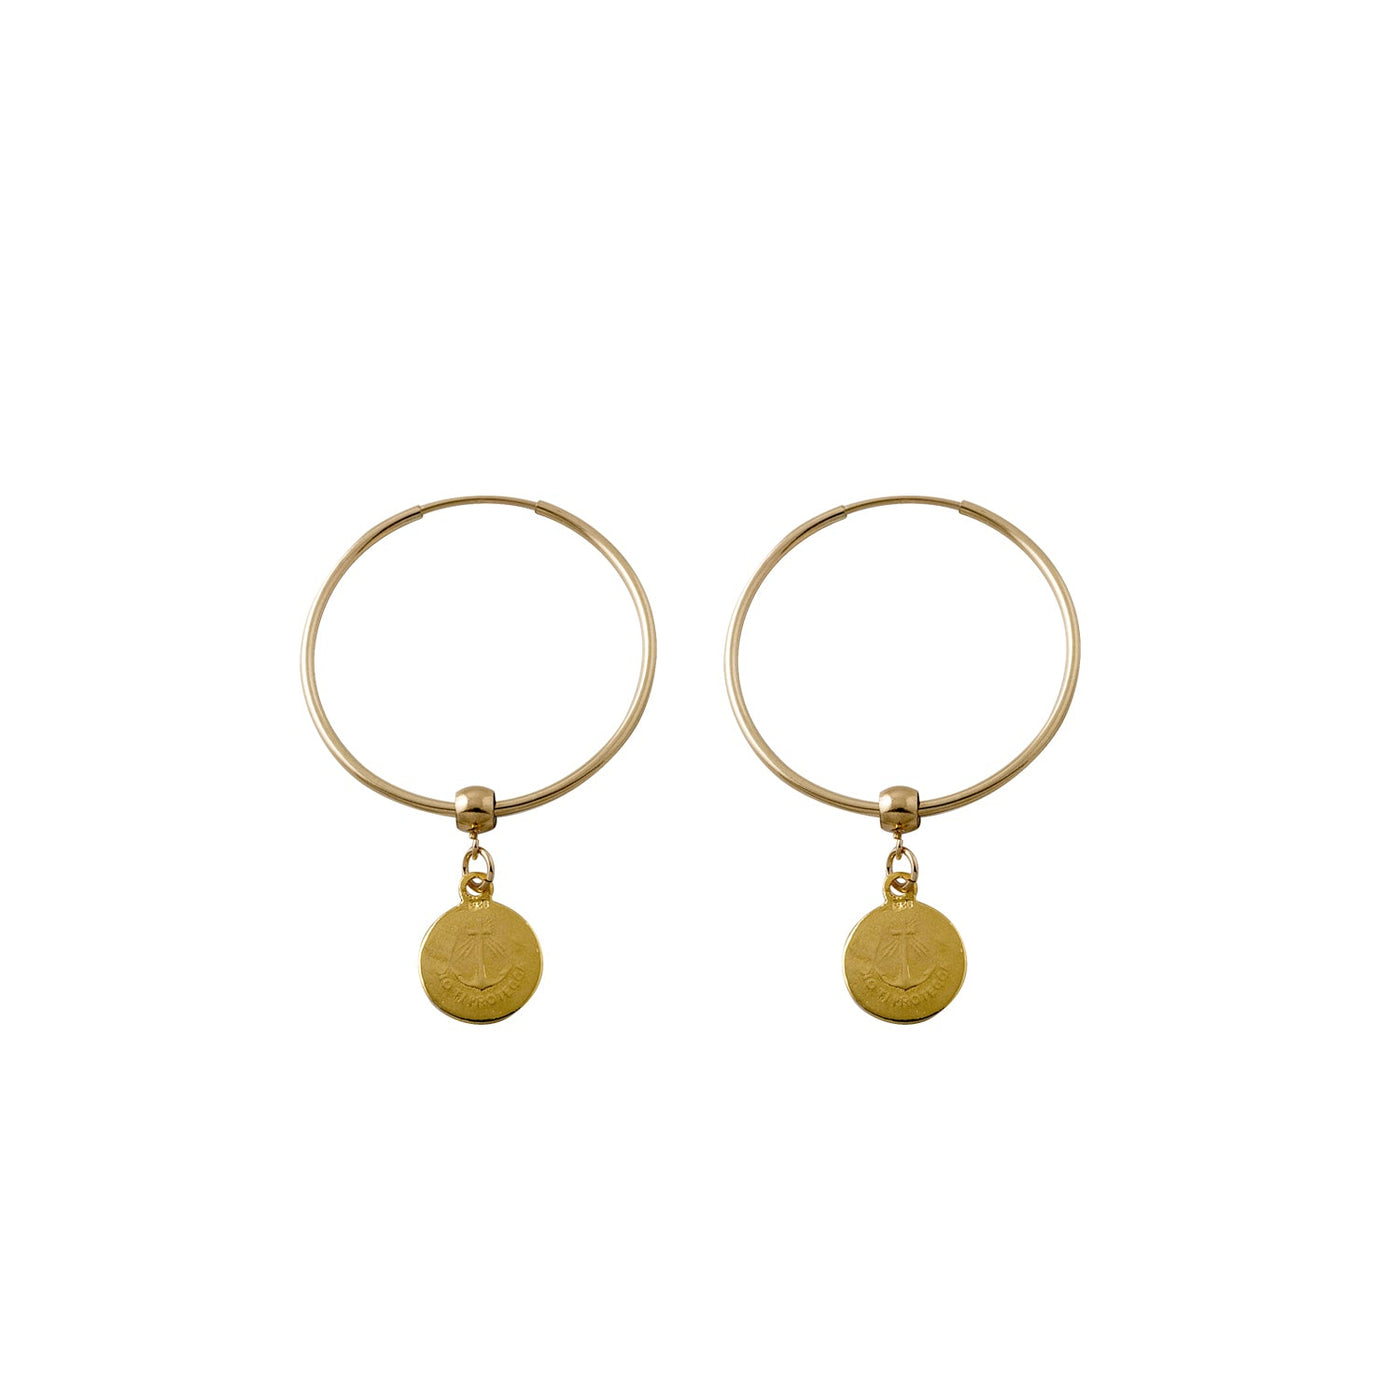 Von Treskow Hoop Earrings with Religious Charms